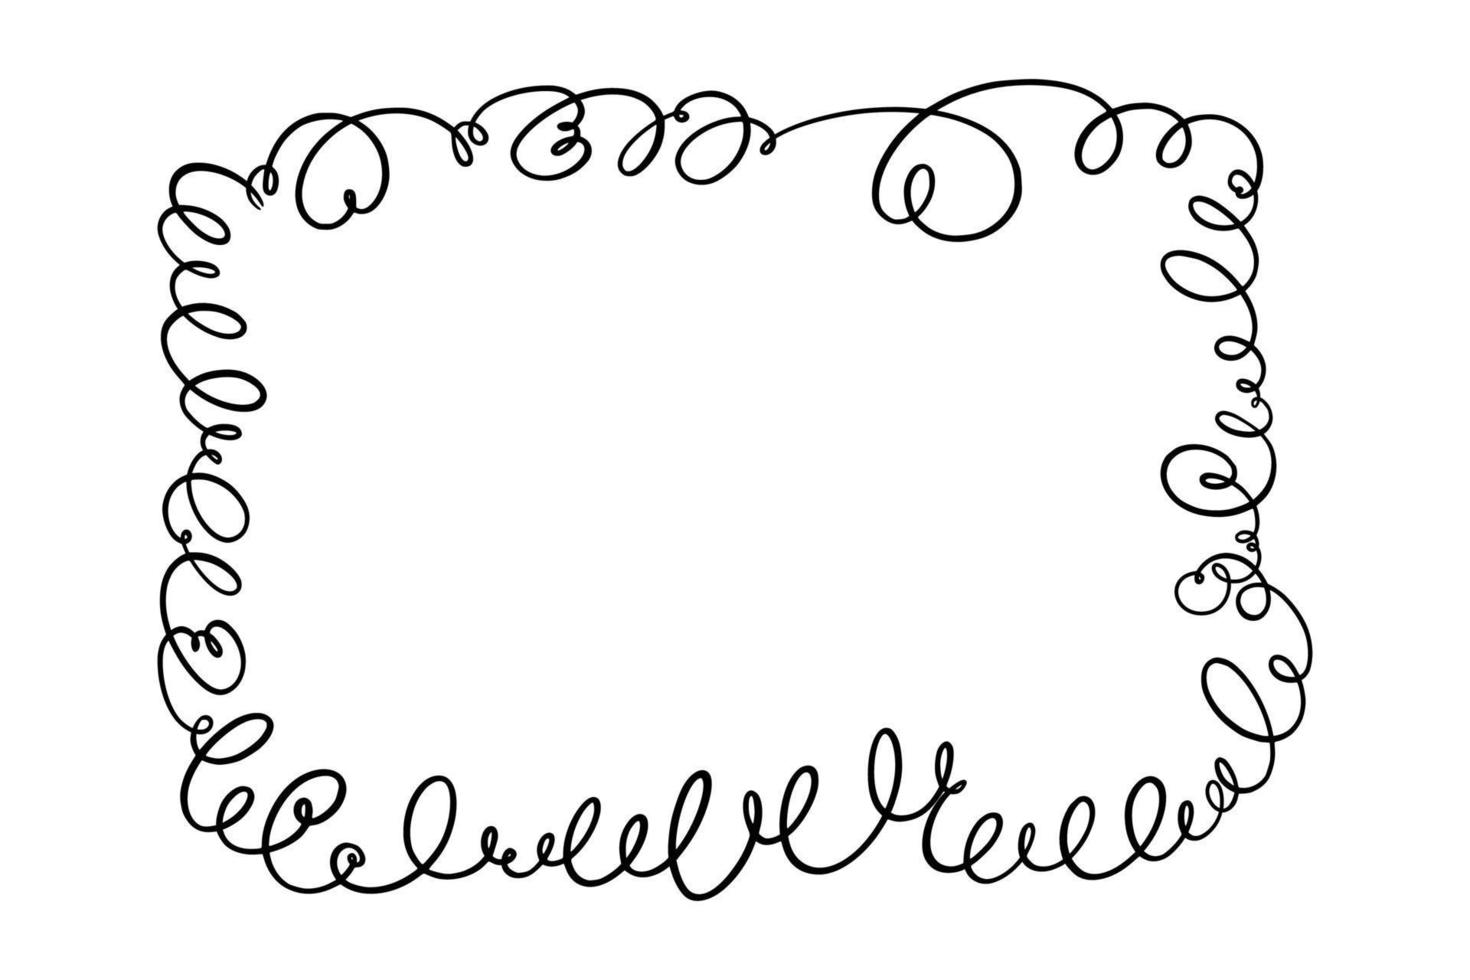 Squiggle and swirl border. Hand drawn calligraphic swirly frame. Vector illustration